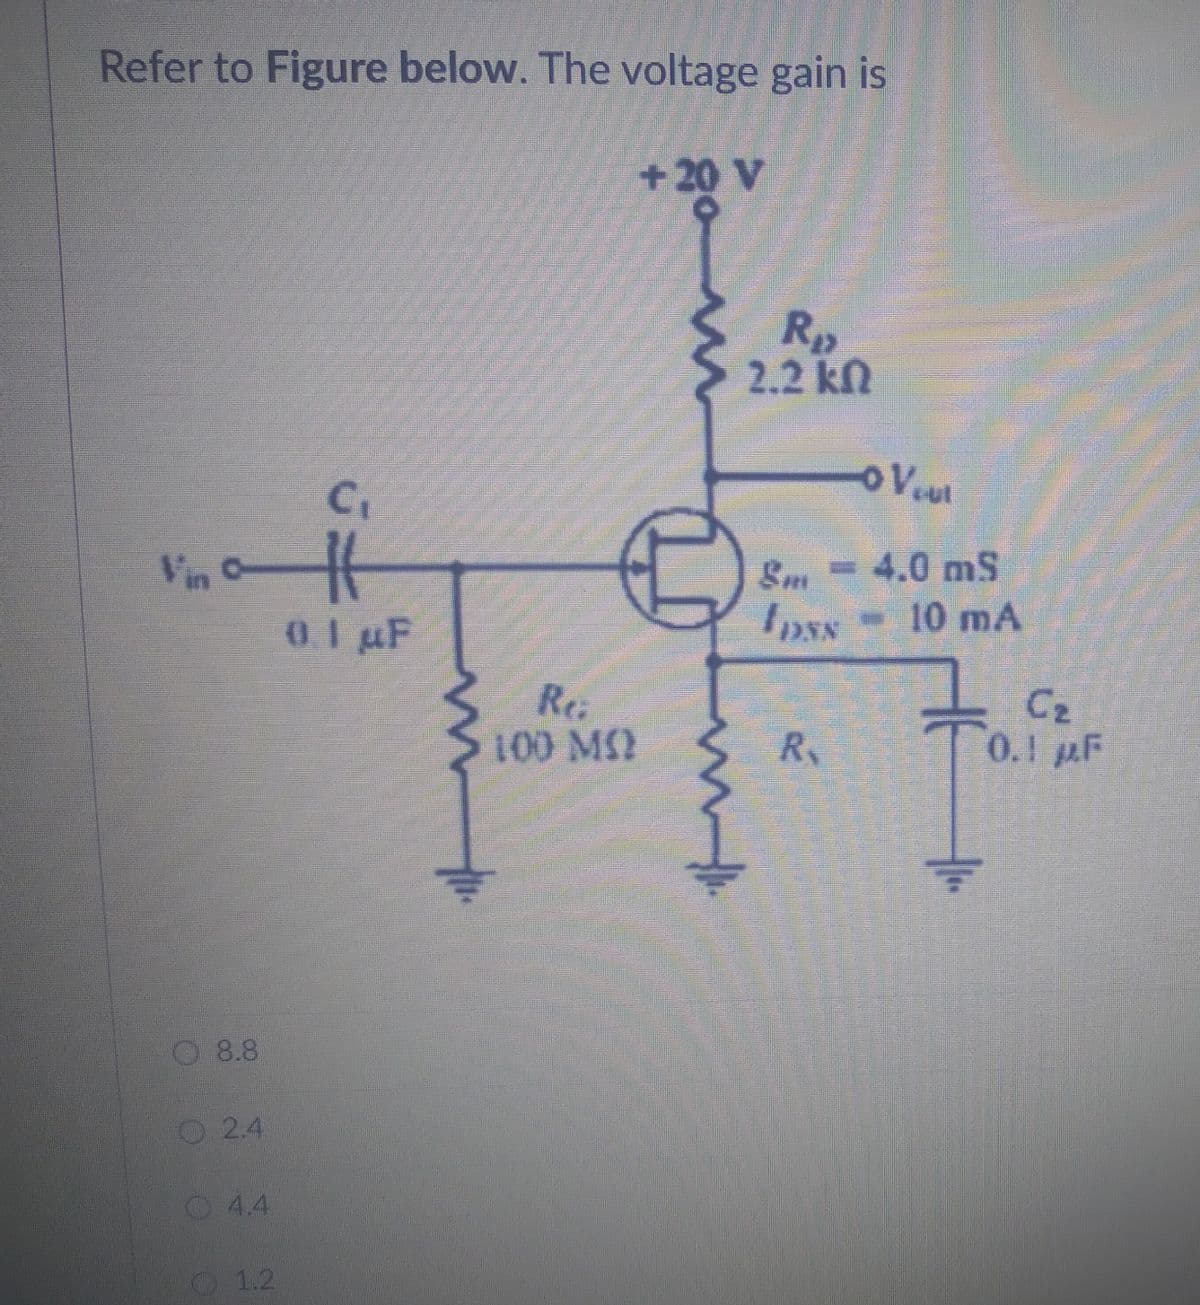 Refer to Figure below. The voltage gain is
+20 V
C₁
8.8
2.4
4.4
1.2
#
01 μF
Re
100 MI
M
w
R₂
2.2 kn
o Vout
Sm= 4.0 mS
10 mA
1DSN
R
C₂
0.1 F